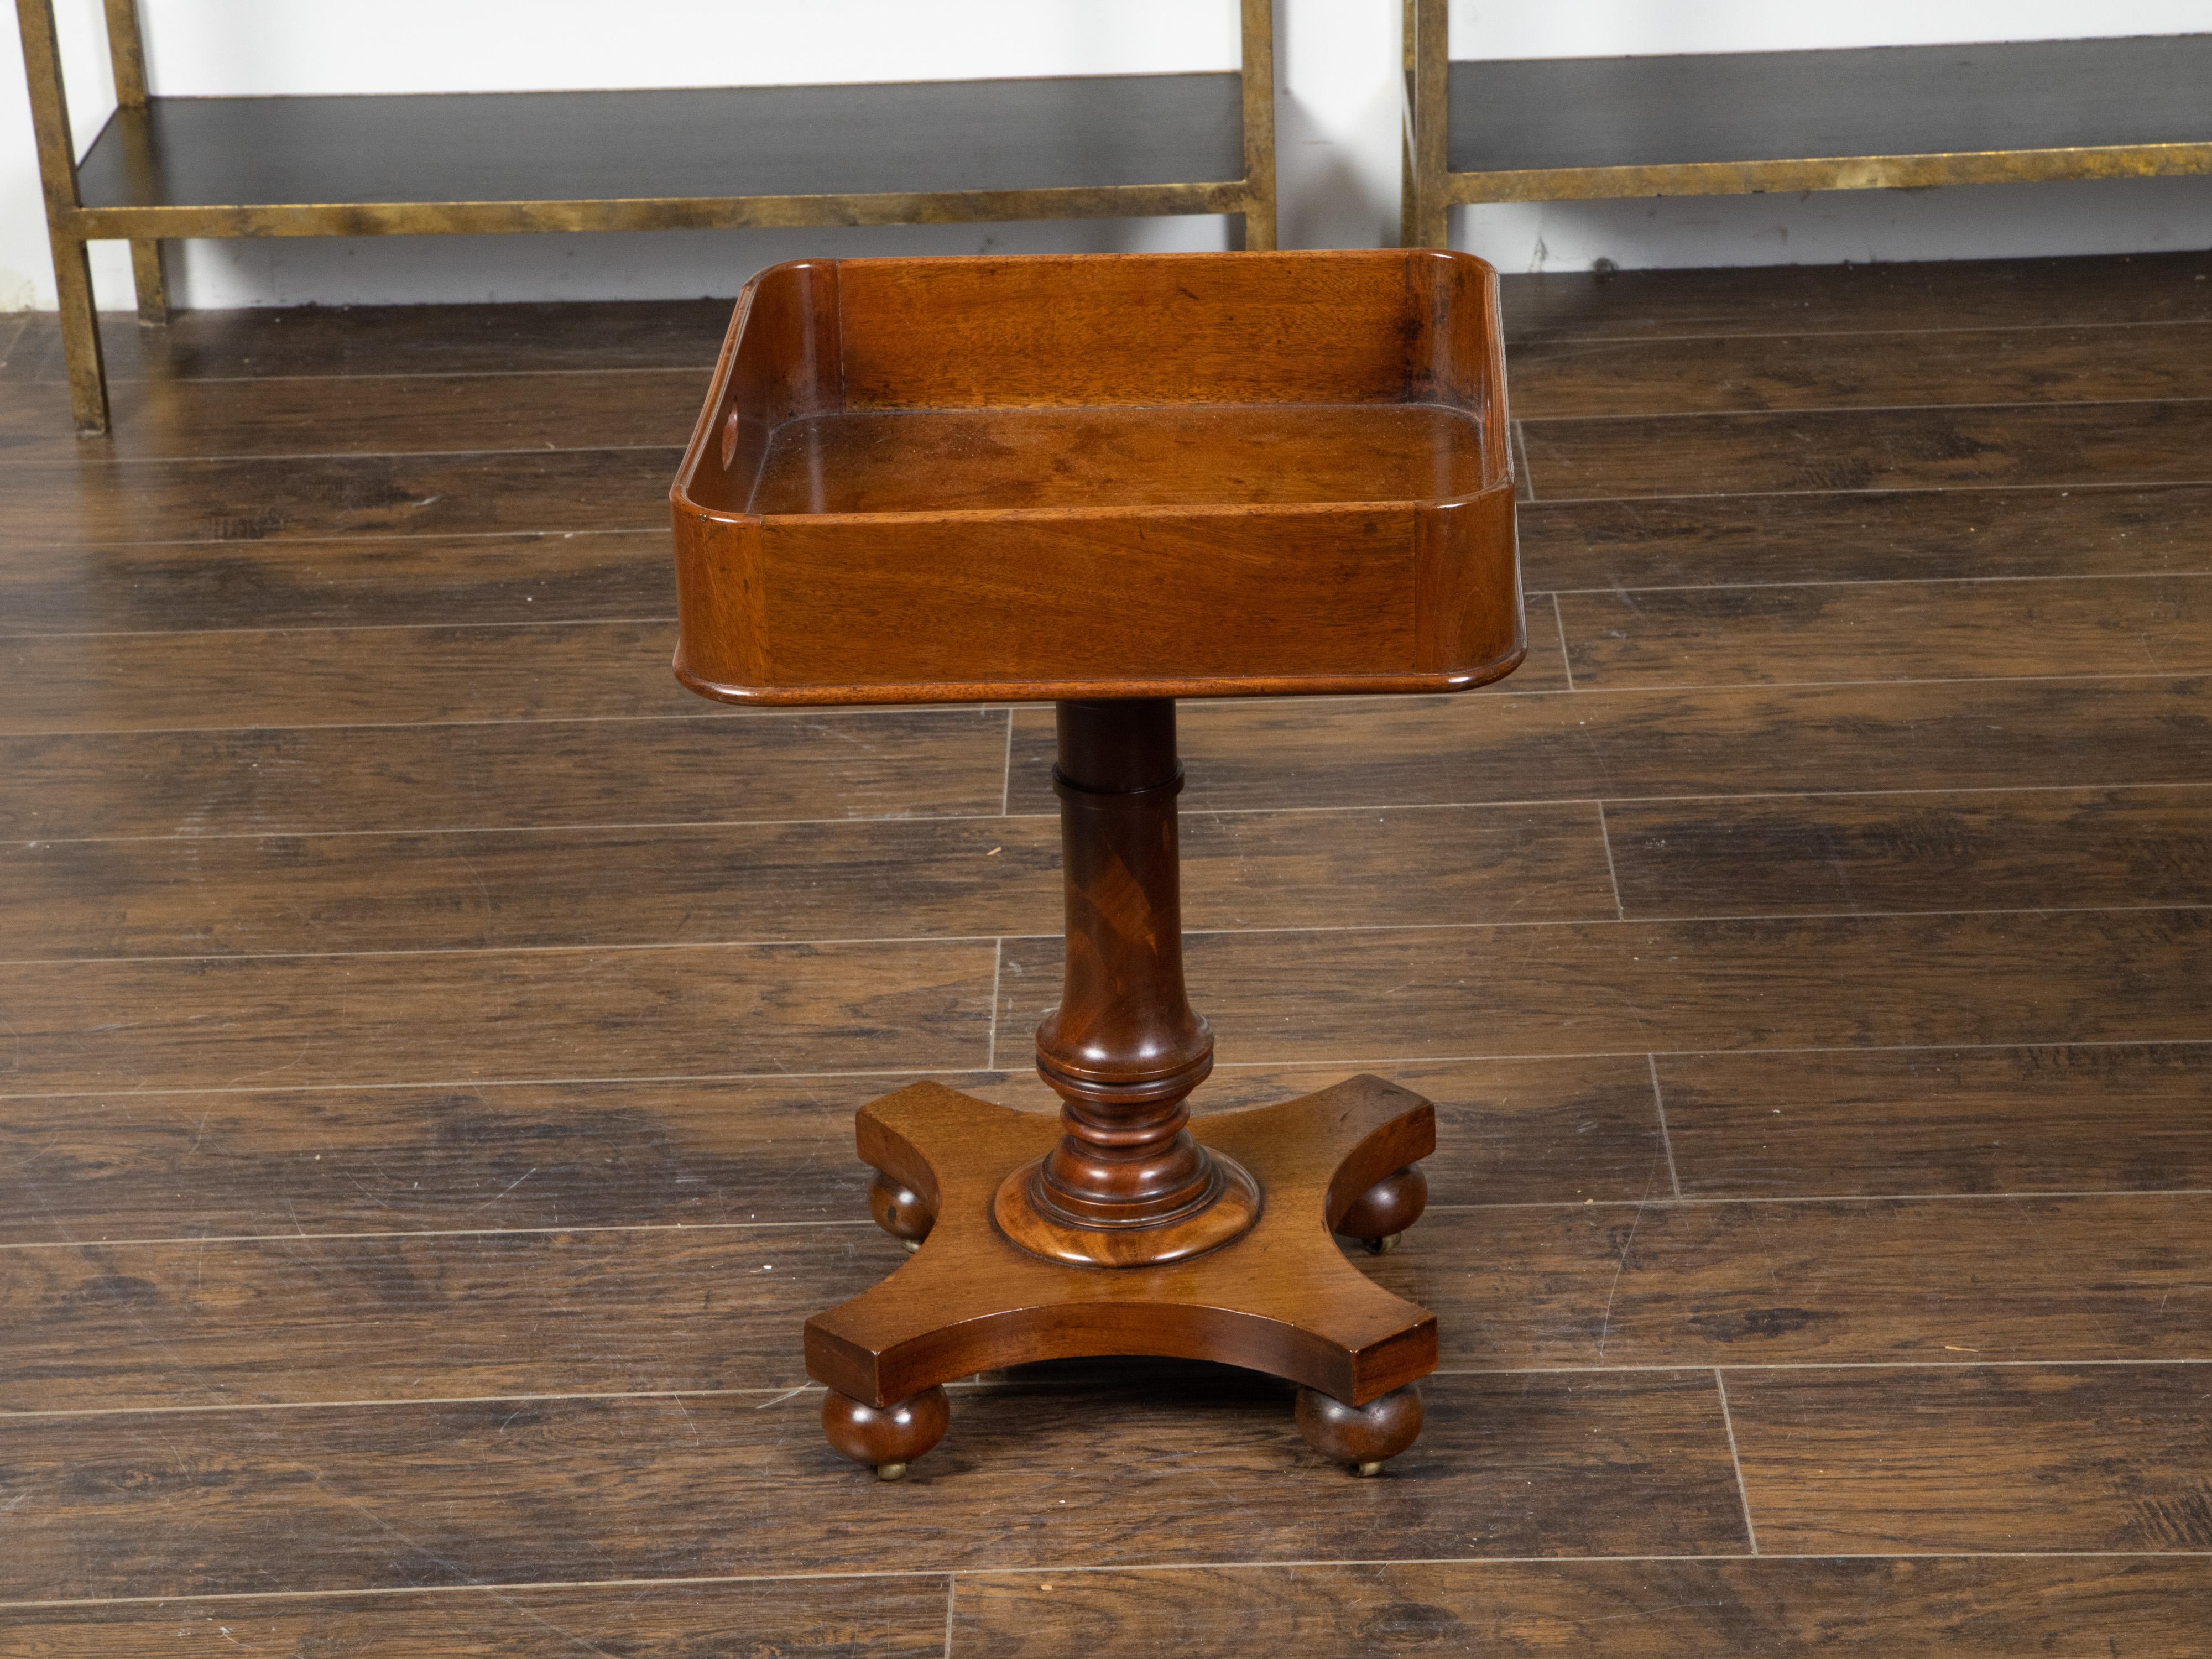 An English mahogany tray top table from the 19th century, with turned pedestal base and onion feet. Created in England during the 19th century, this mahogany table features a large tray top with lateral pierced handles, sitting above a turned